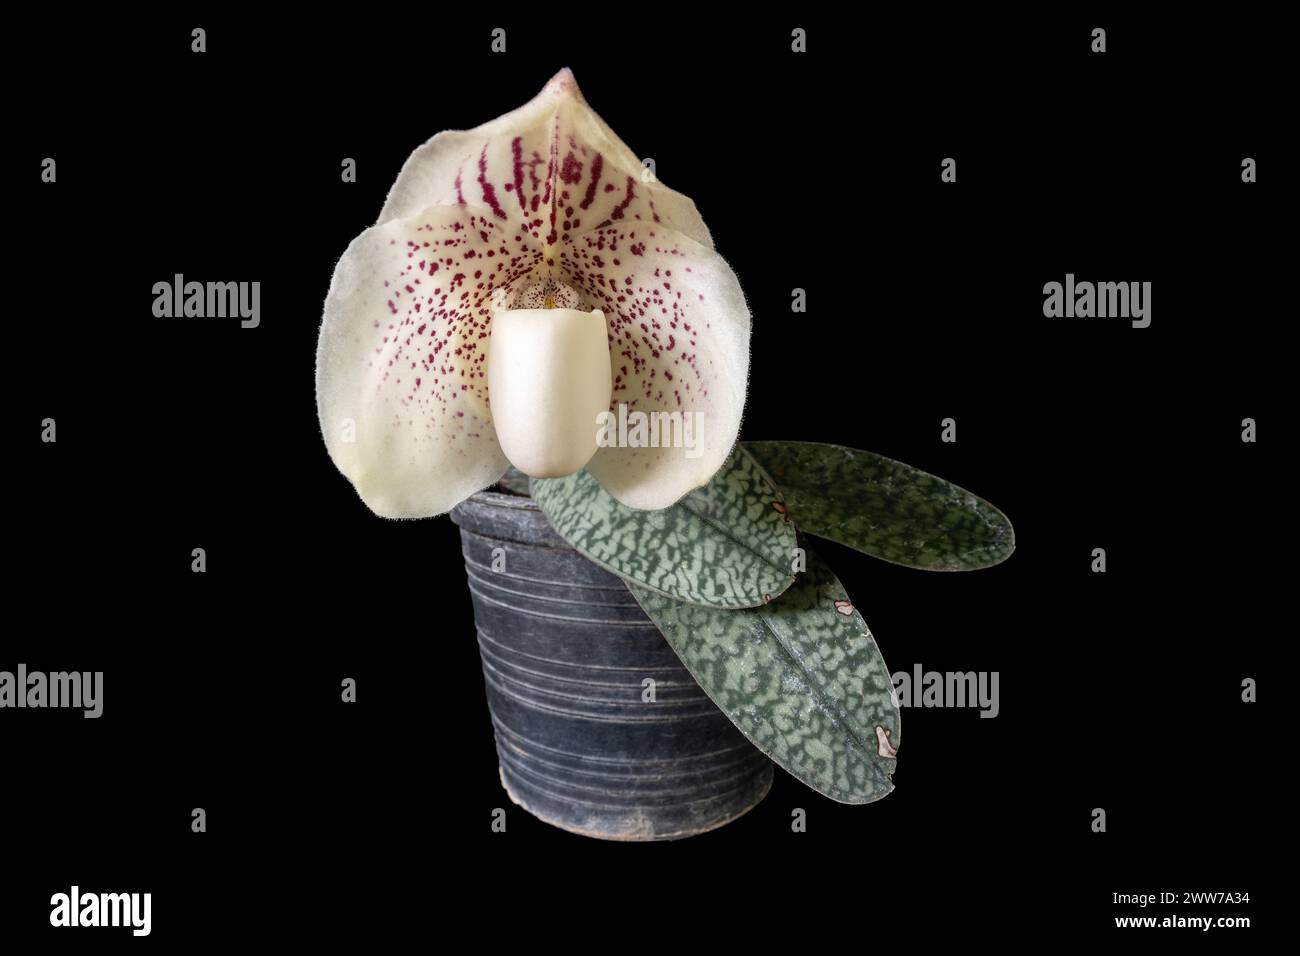 Closeup view of potted lady slipper orchid paphiopedilum godefroyae var ang-thong with flower and leaves isolated on black background Stock Photo